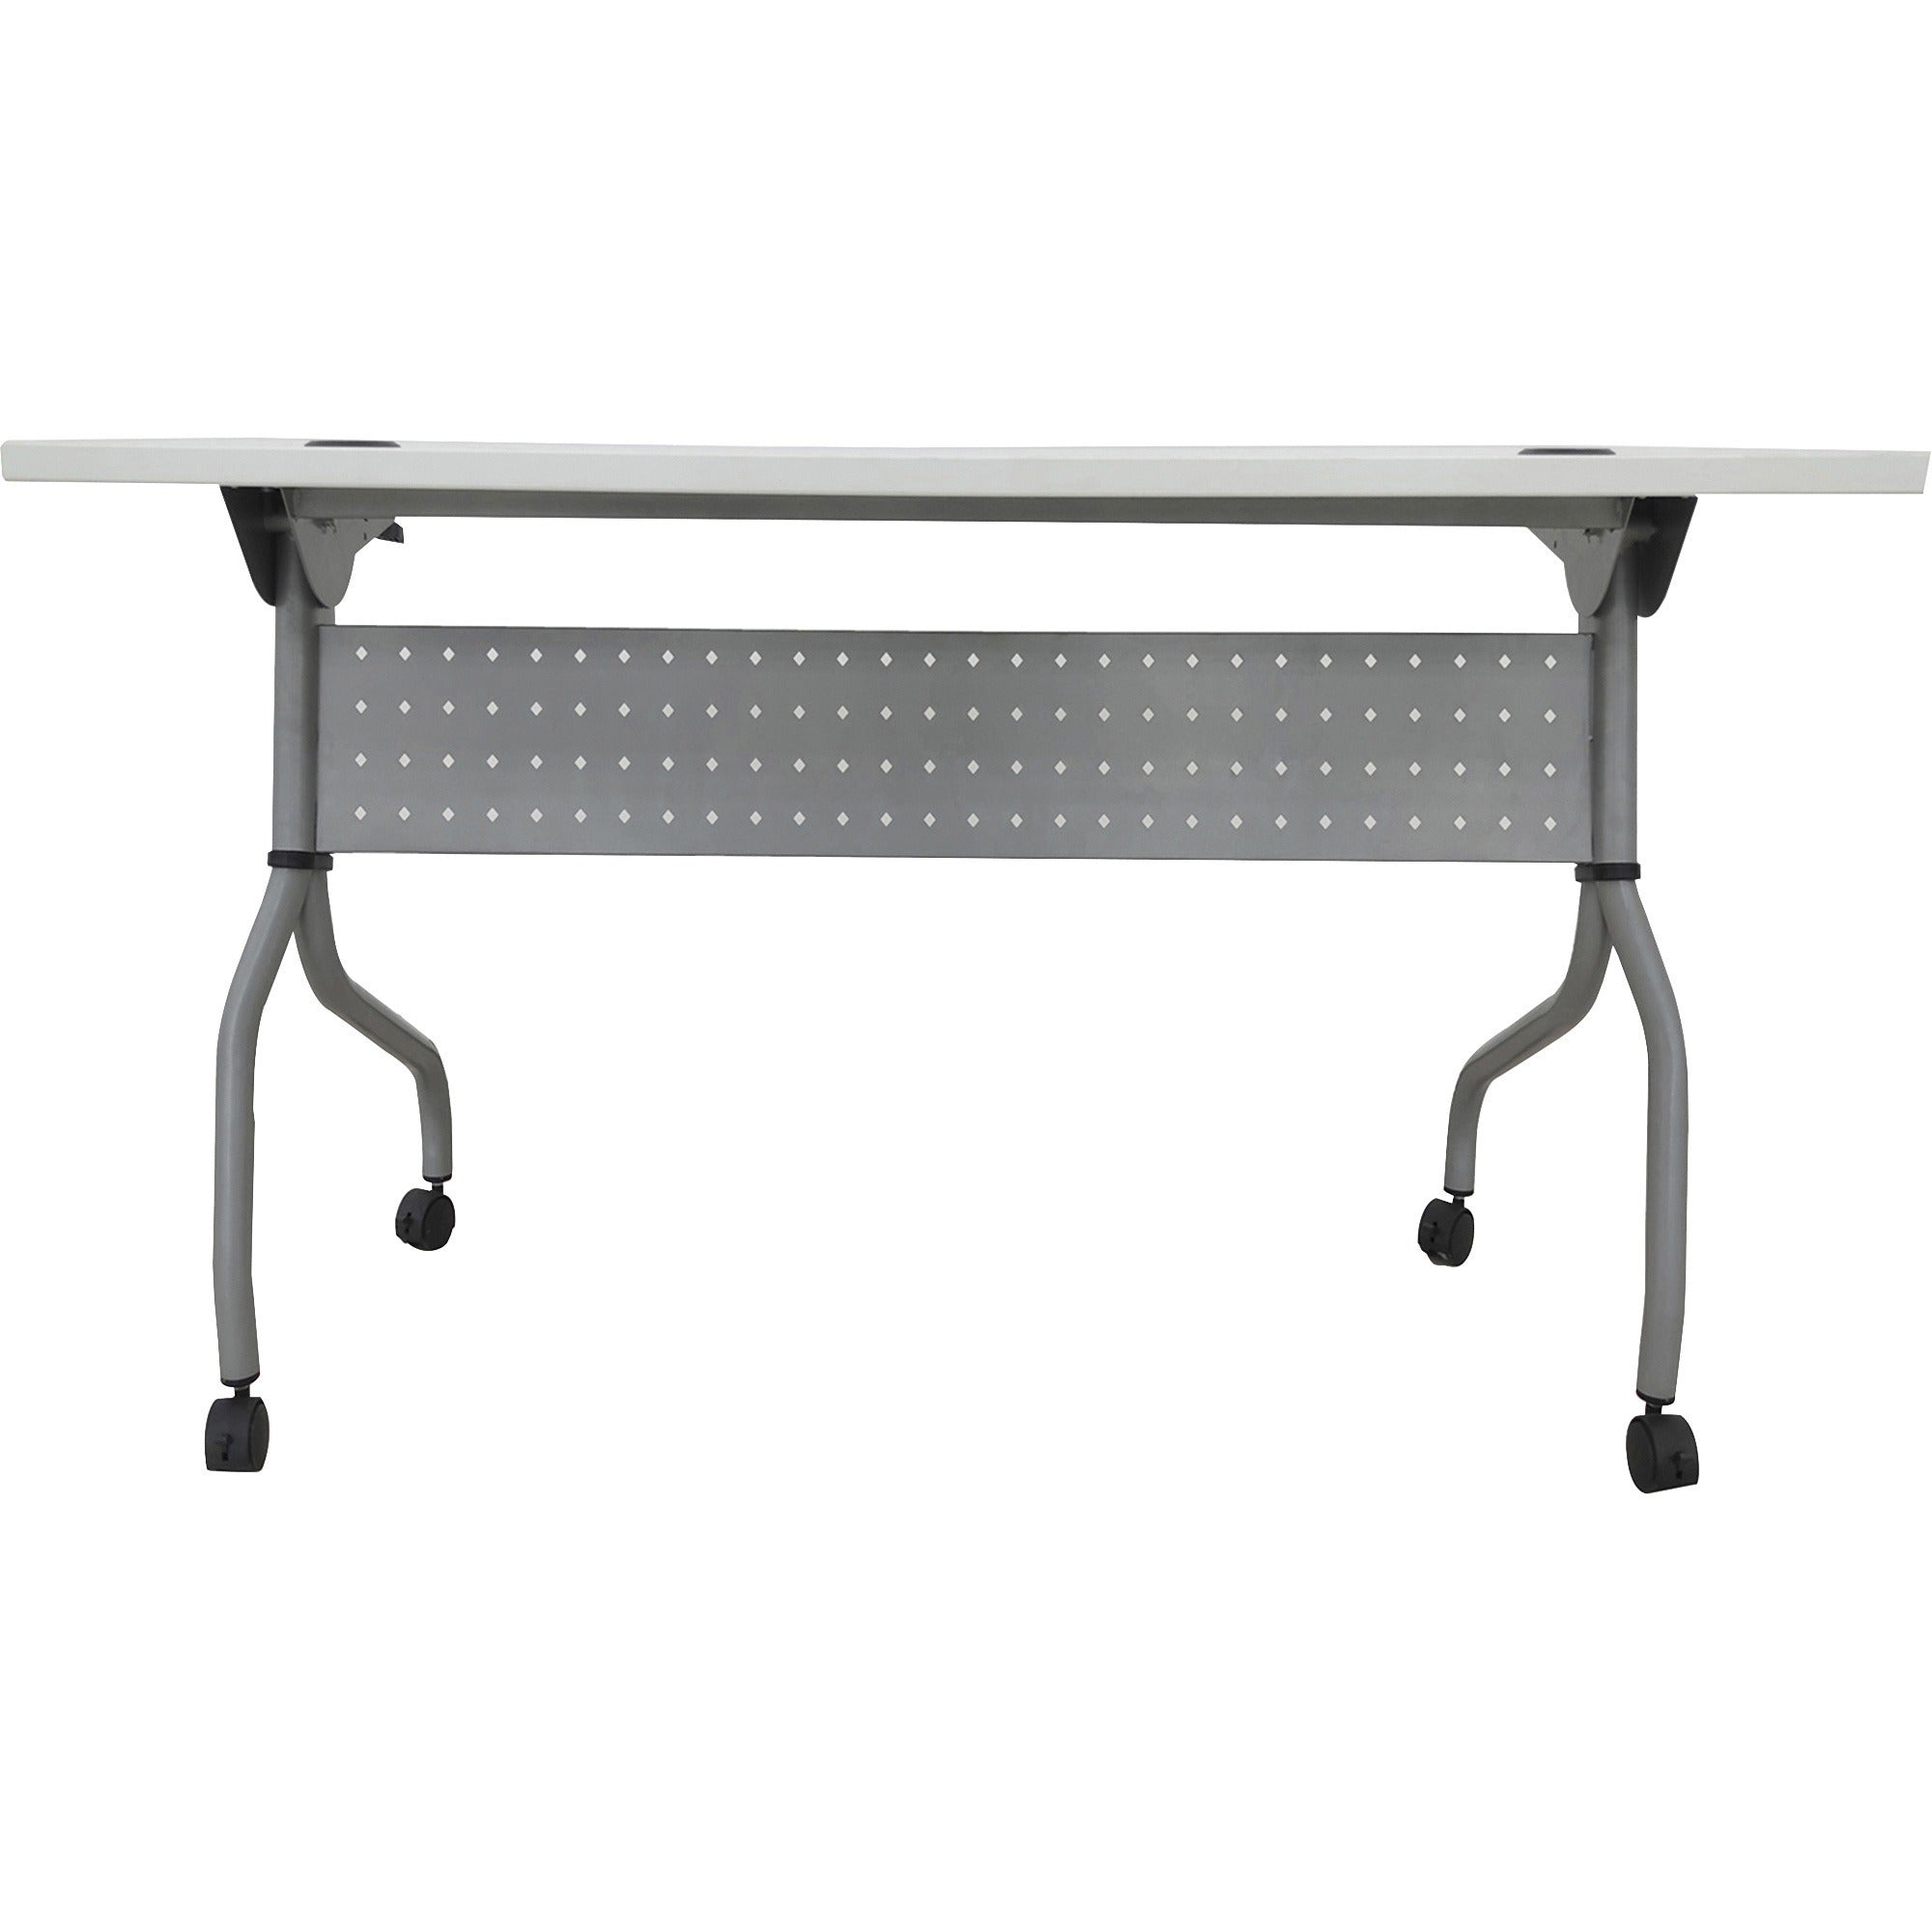 lorell-flip-top-training-table-for-table-topwhite-rectangle-top-silver-folding-base-4-legs-2360-table-top-length-x-48-table-top-width-2950-height-assembly-required-1-each_llr60745 - 4